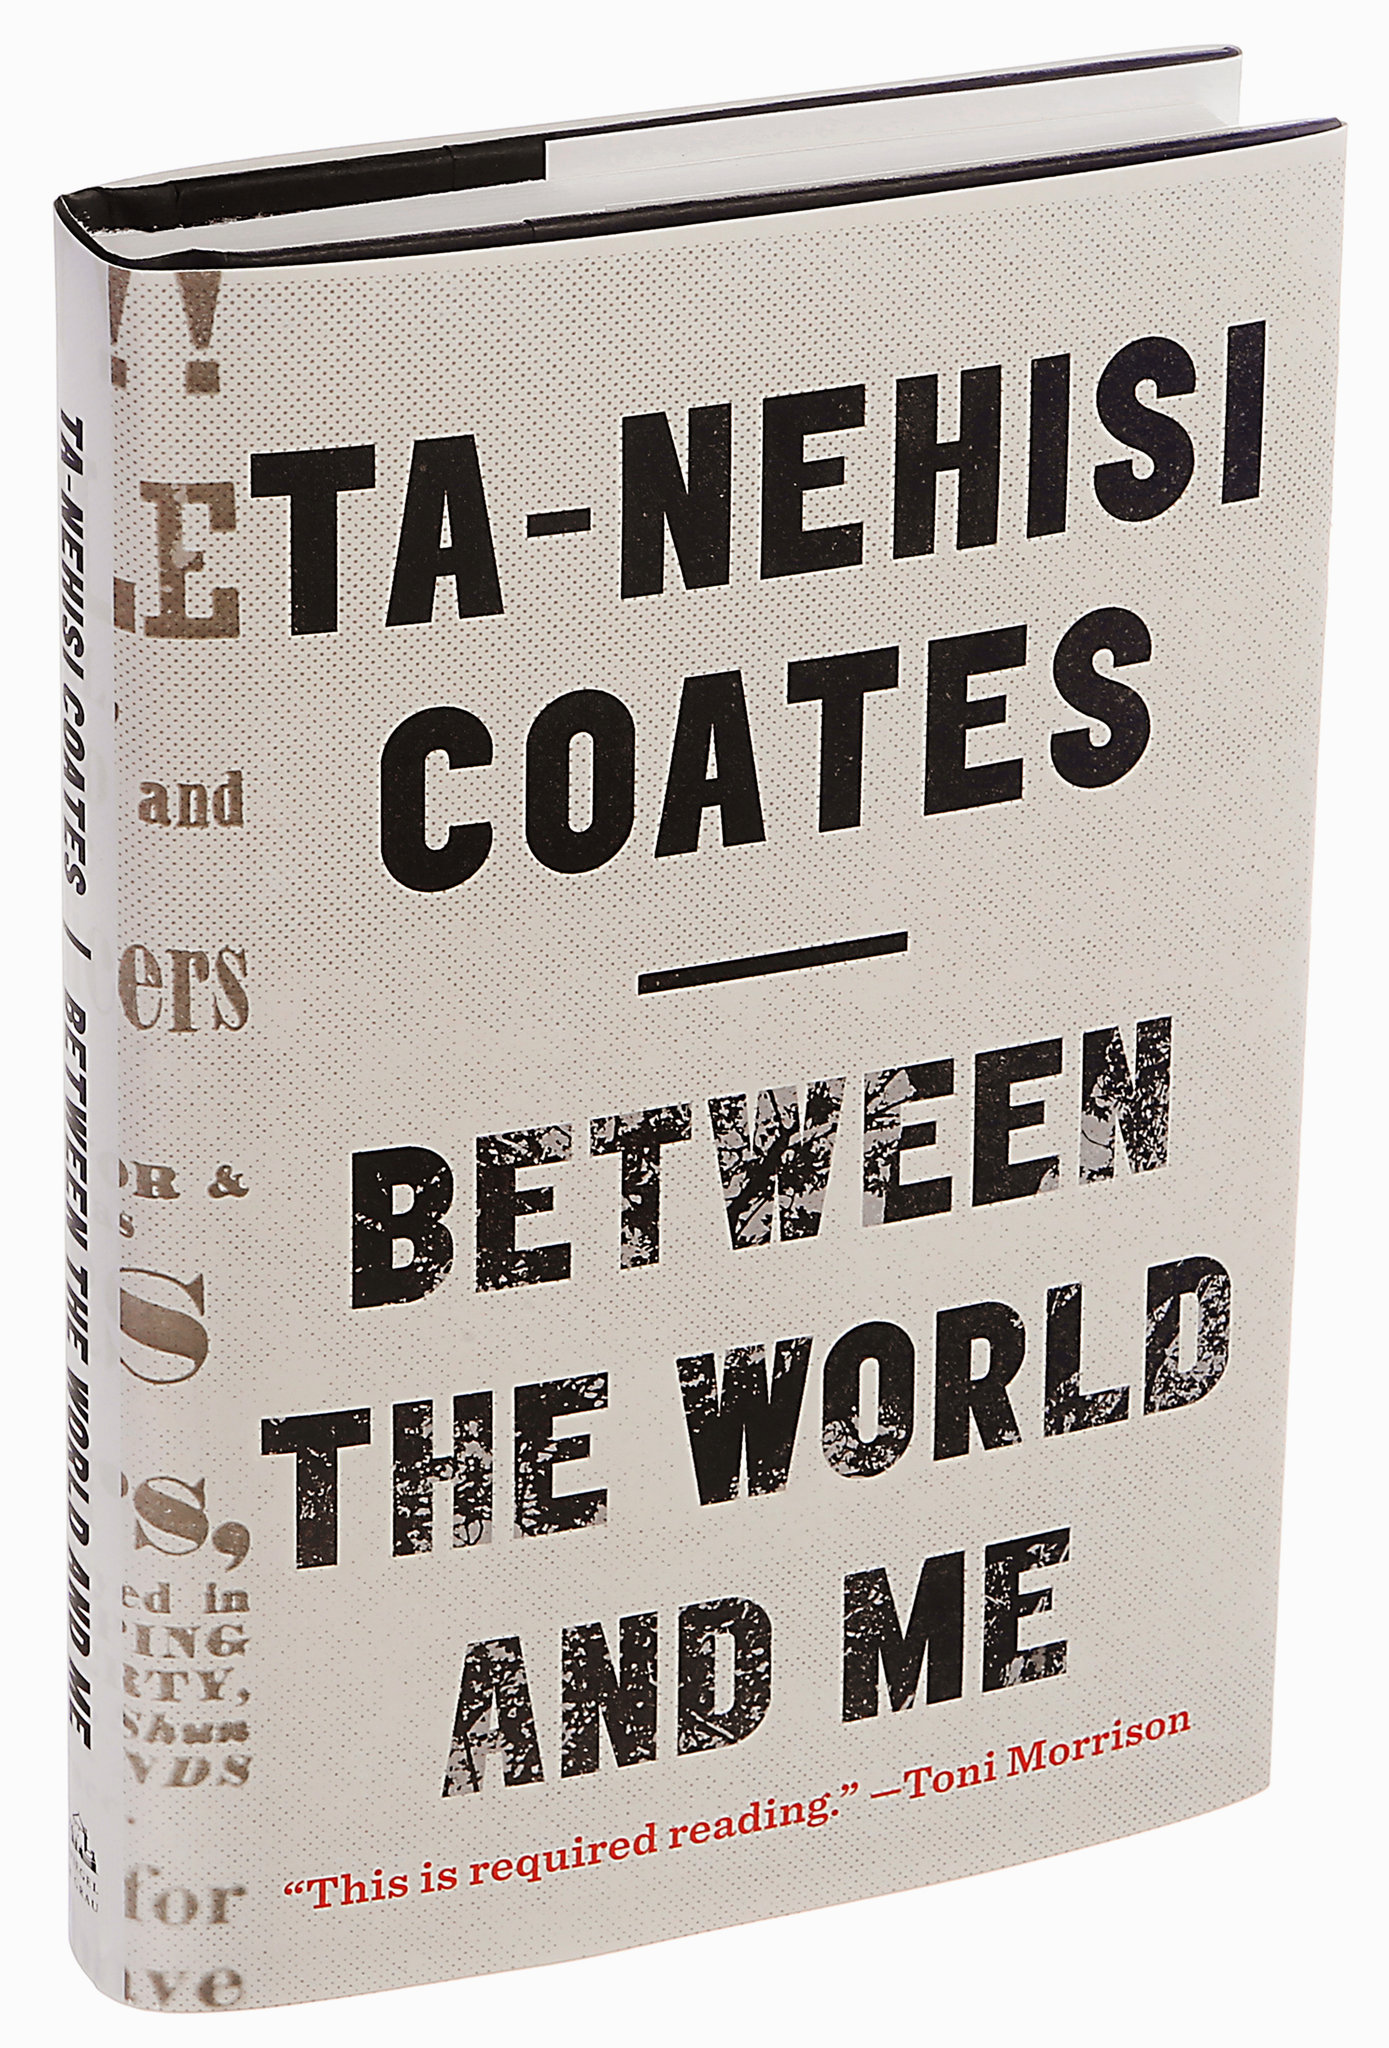 6. 'Between the World and Me' by Ta-Nehisi Coates